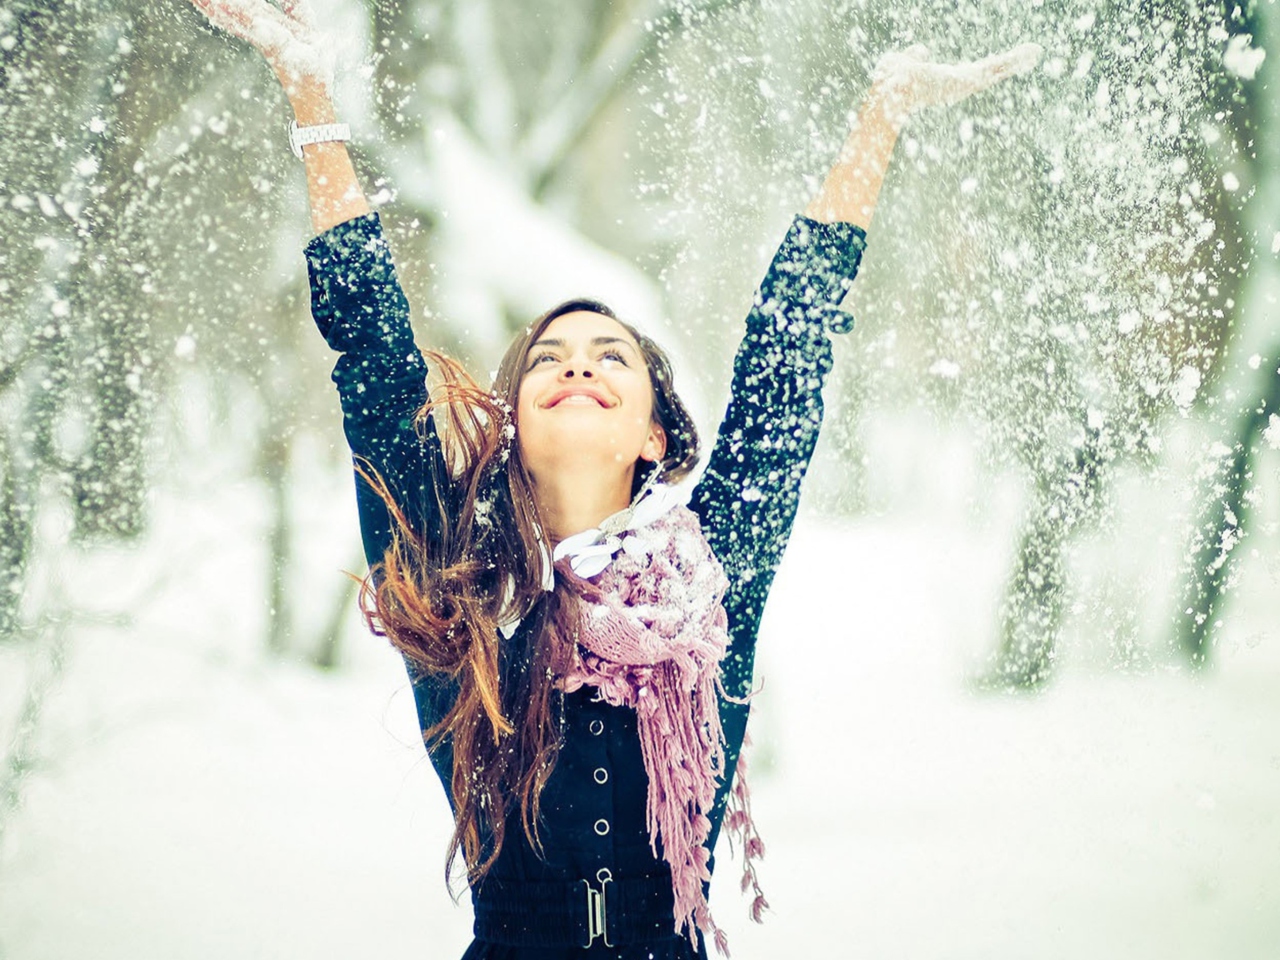 Winter, Snow And Happy Girl wallpaper 1280x960